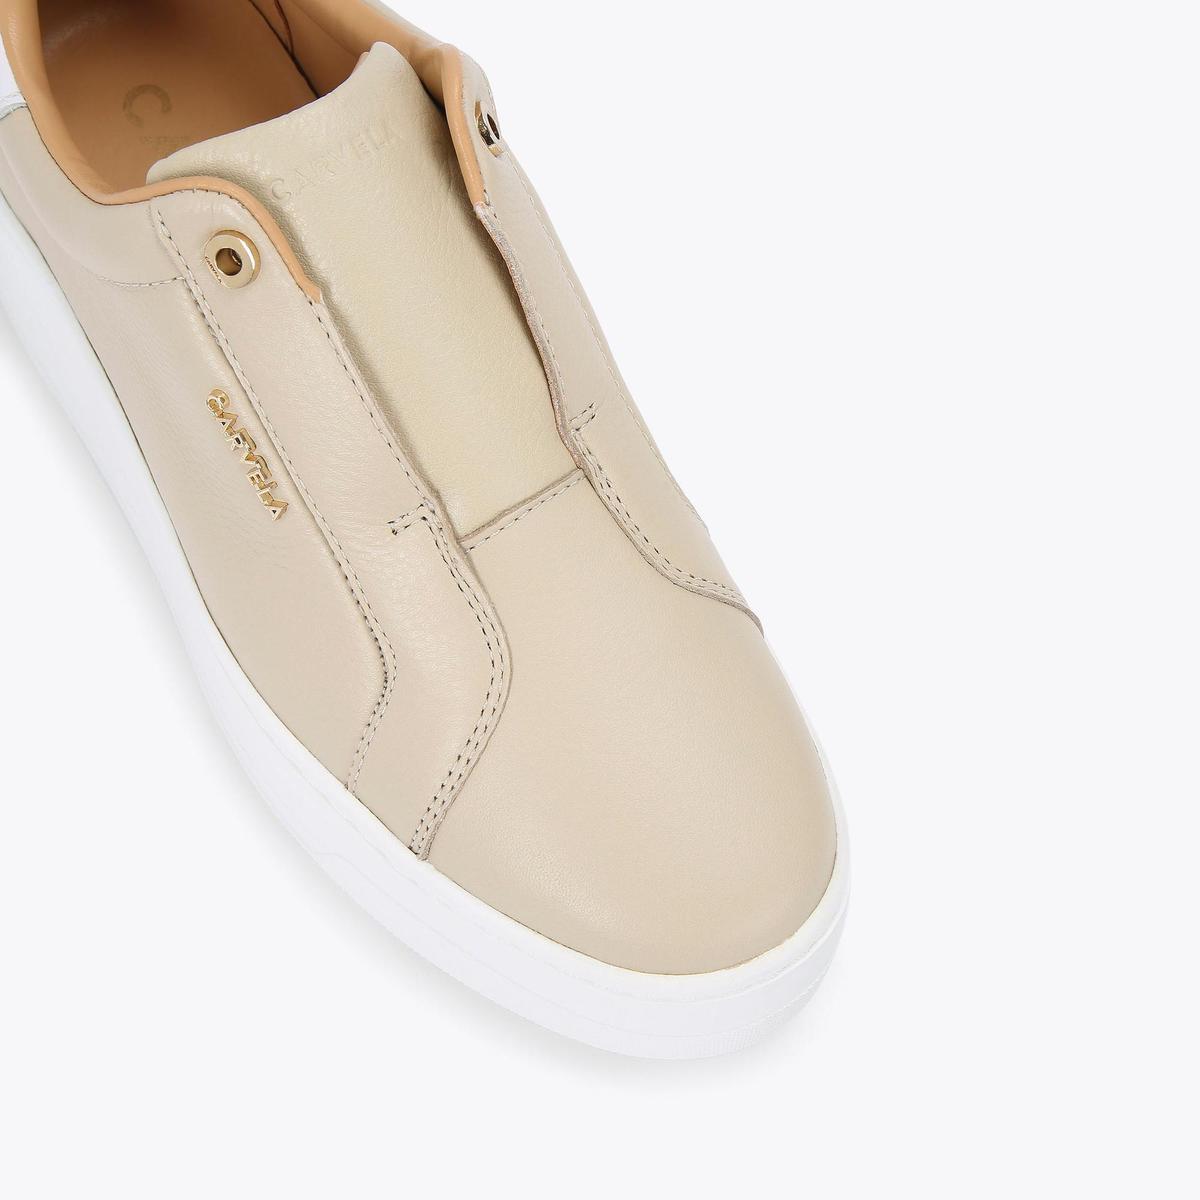 CONNECTED LACELESS Taupe Leather Trainers by CARVELA